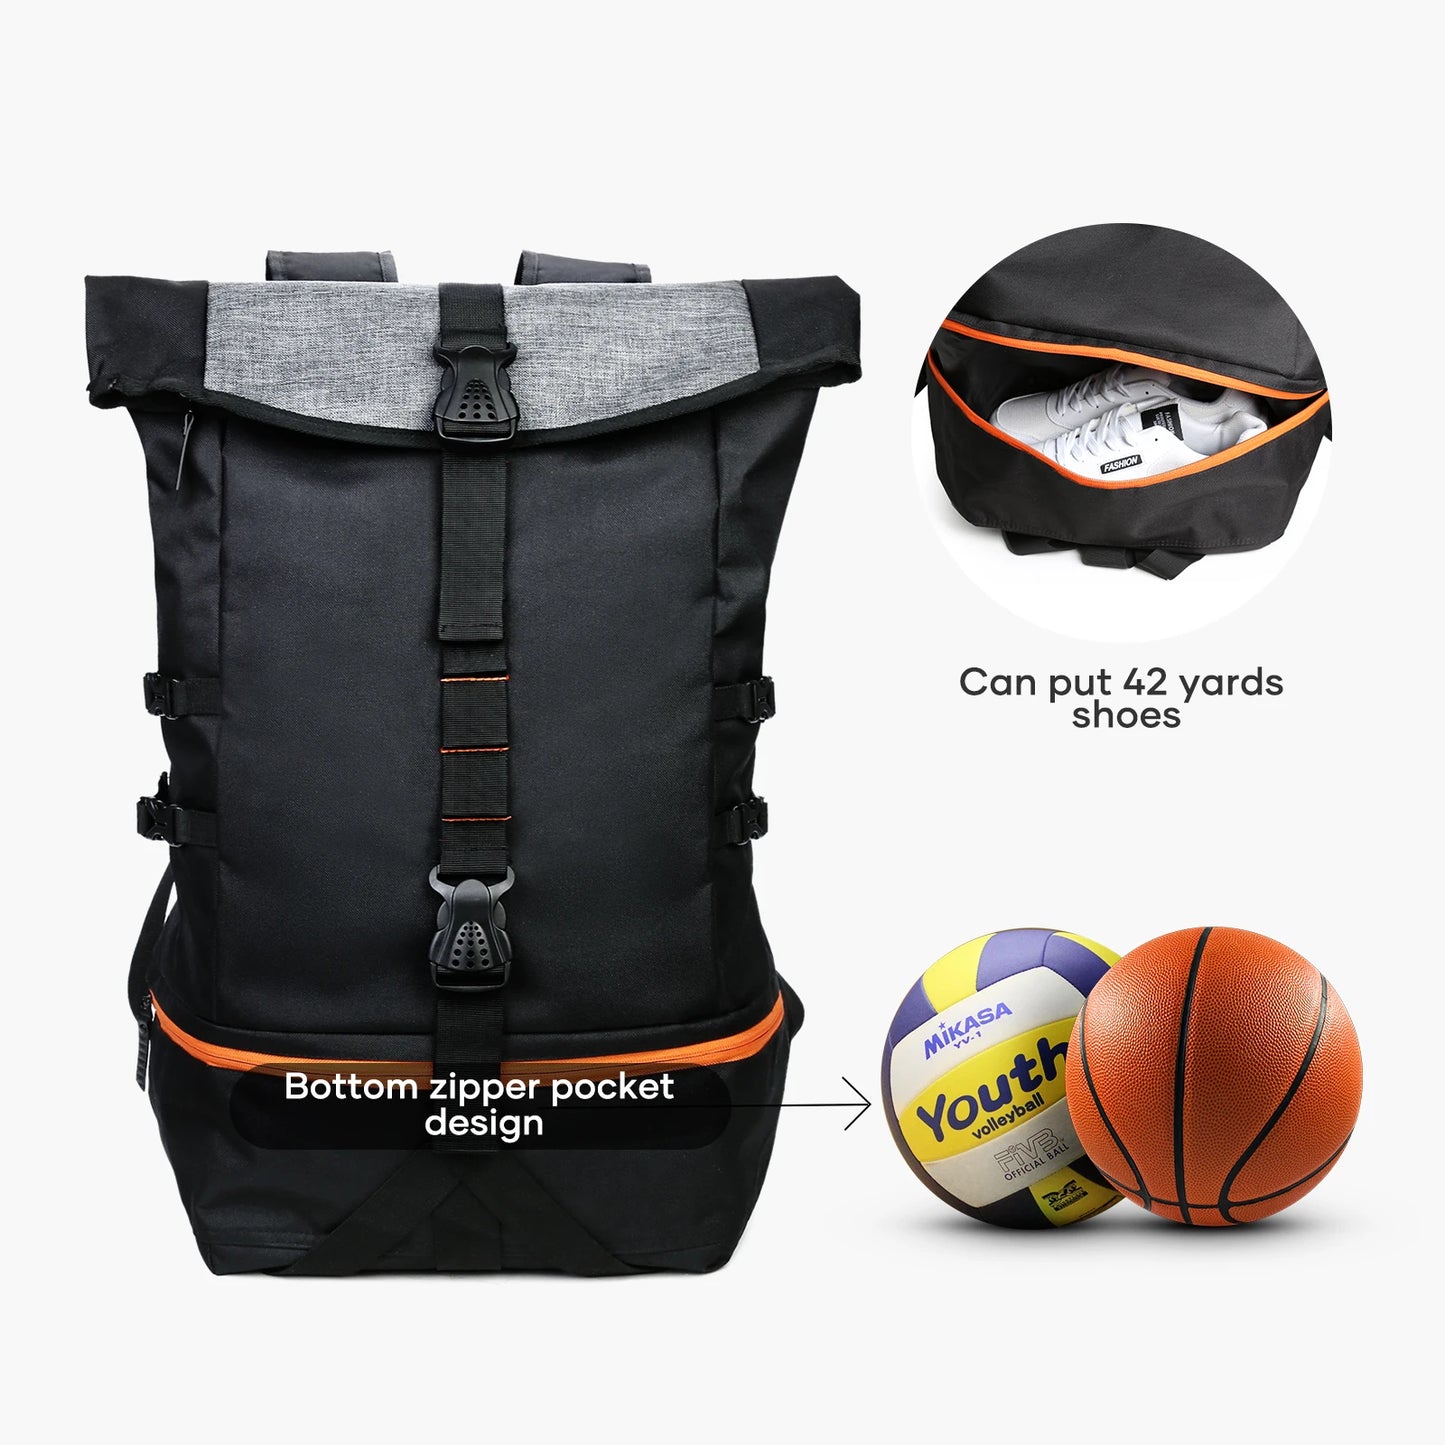 Basketball Backpack Large Sports Bag for Men with Separate Ball compartment, Sports Equipment Bag for Soccer, Volleyball, Travel